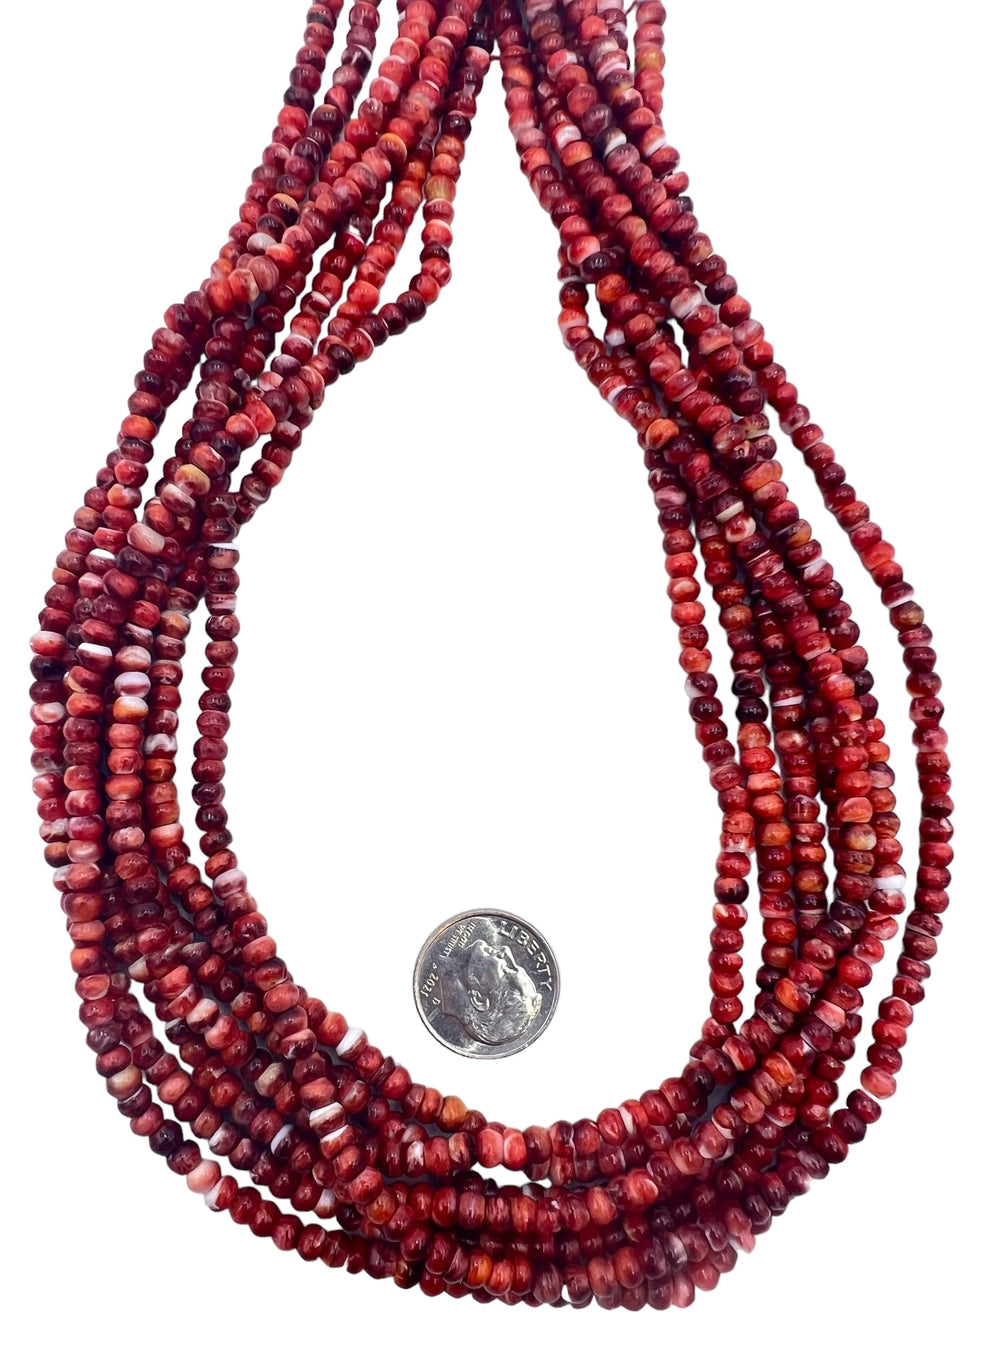 Red/Rust Spiny Oyster 4mm Rondelle Beads (16 Inch Strand)